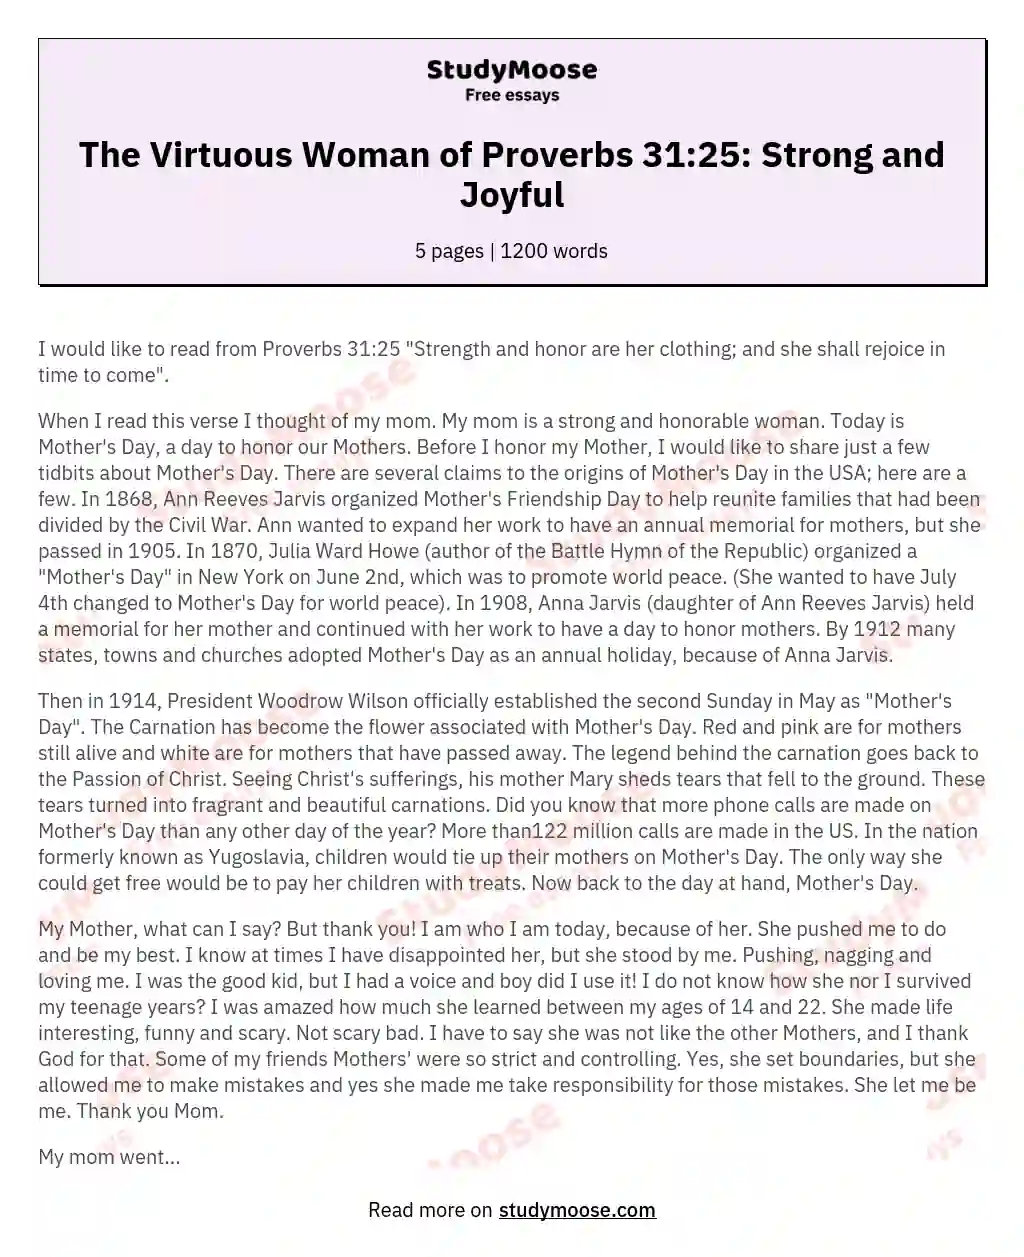 The Virtuous Woman of Proverbs 31:25: Strong and Joyful essay